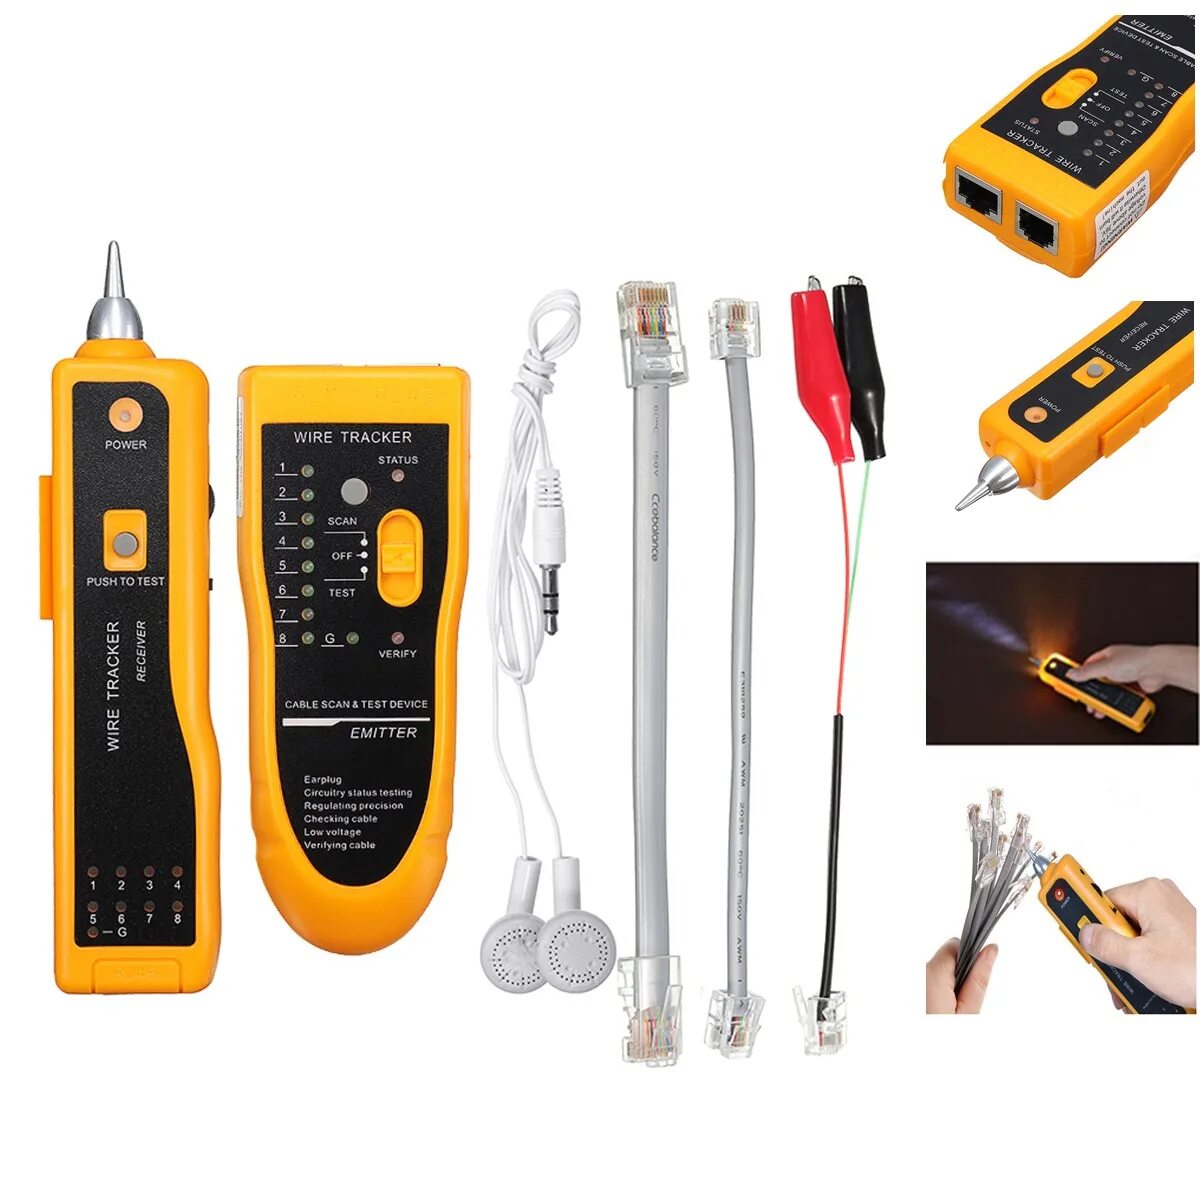 Кабельный тестер MJ-868. Type с Cable Tester. Receiver wire Tracker 255. Noftya Cable Tester 15000р. Power tracking